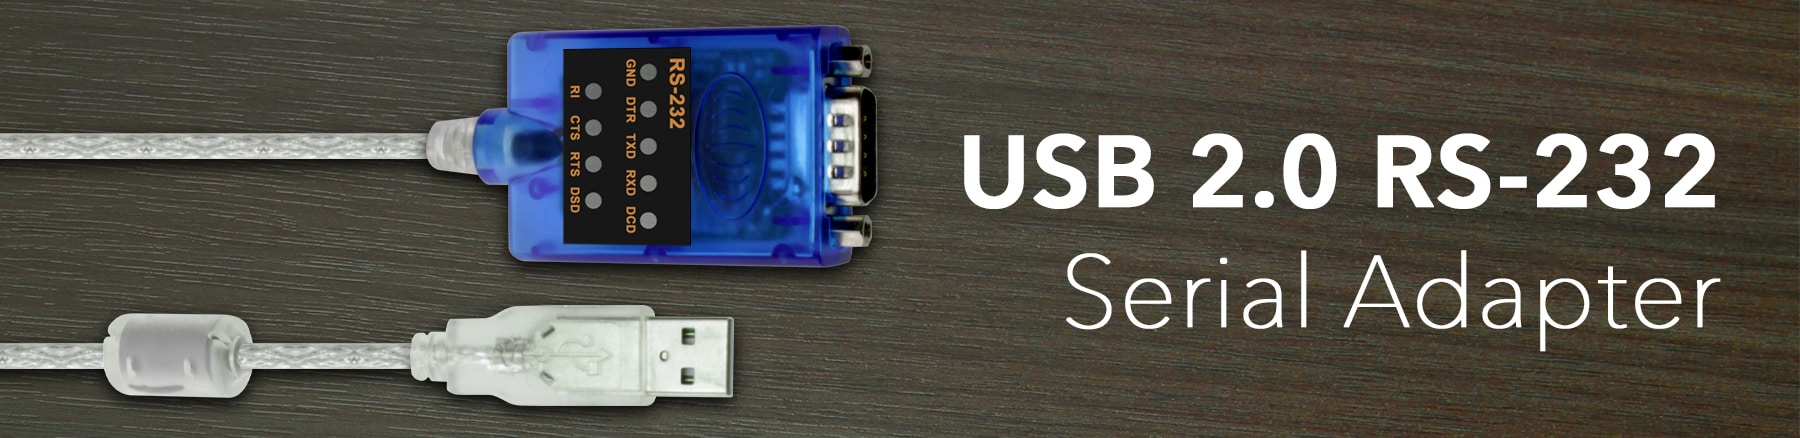 USB to USB Direct Link - USB 2.0 specifications